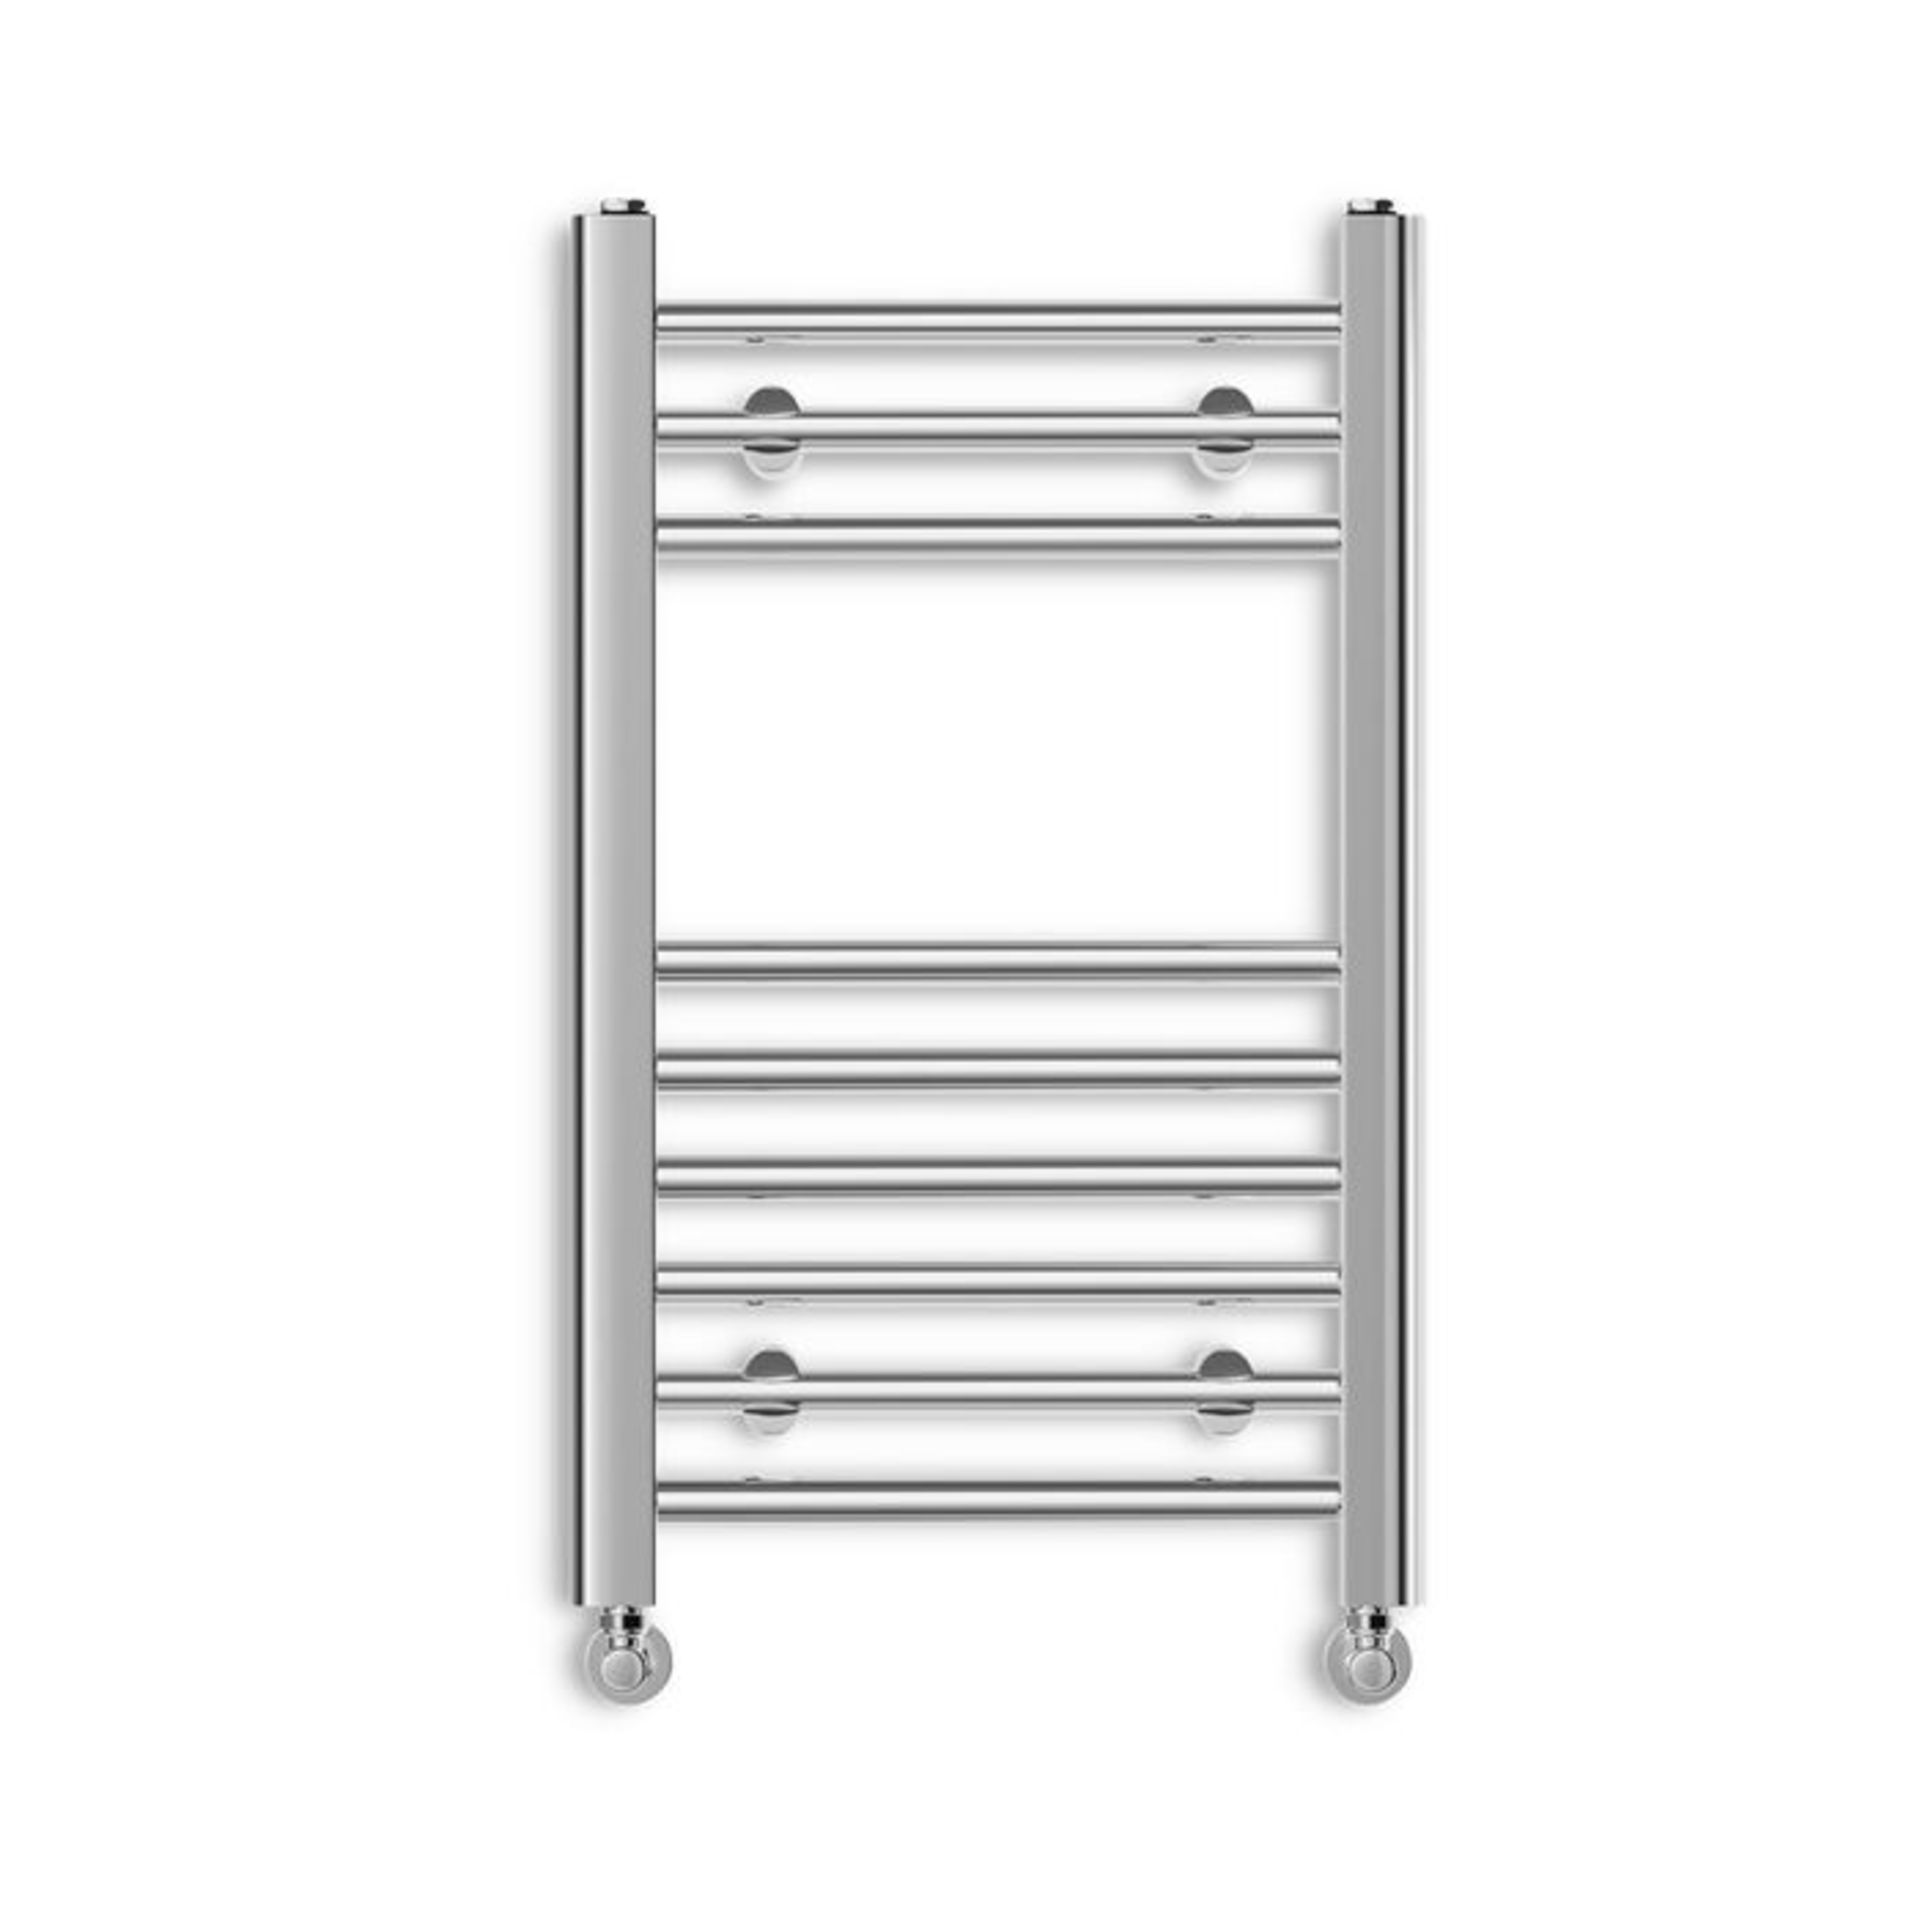 (HP69) 650x400mm Straight Heated Towel Radiator. Low carbon steel chrome plated radiator. This - Image 2 of 2